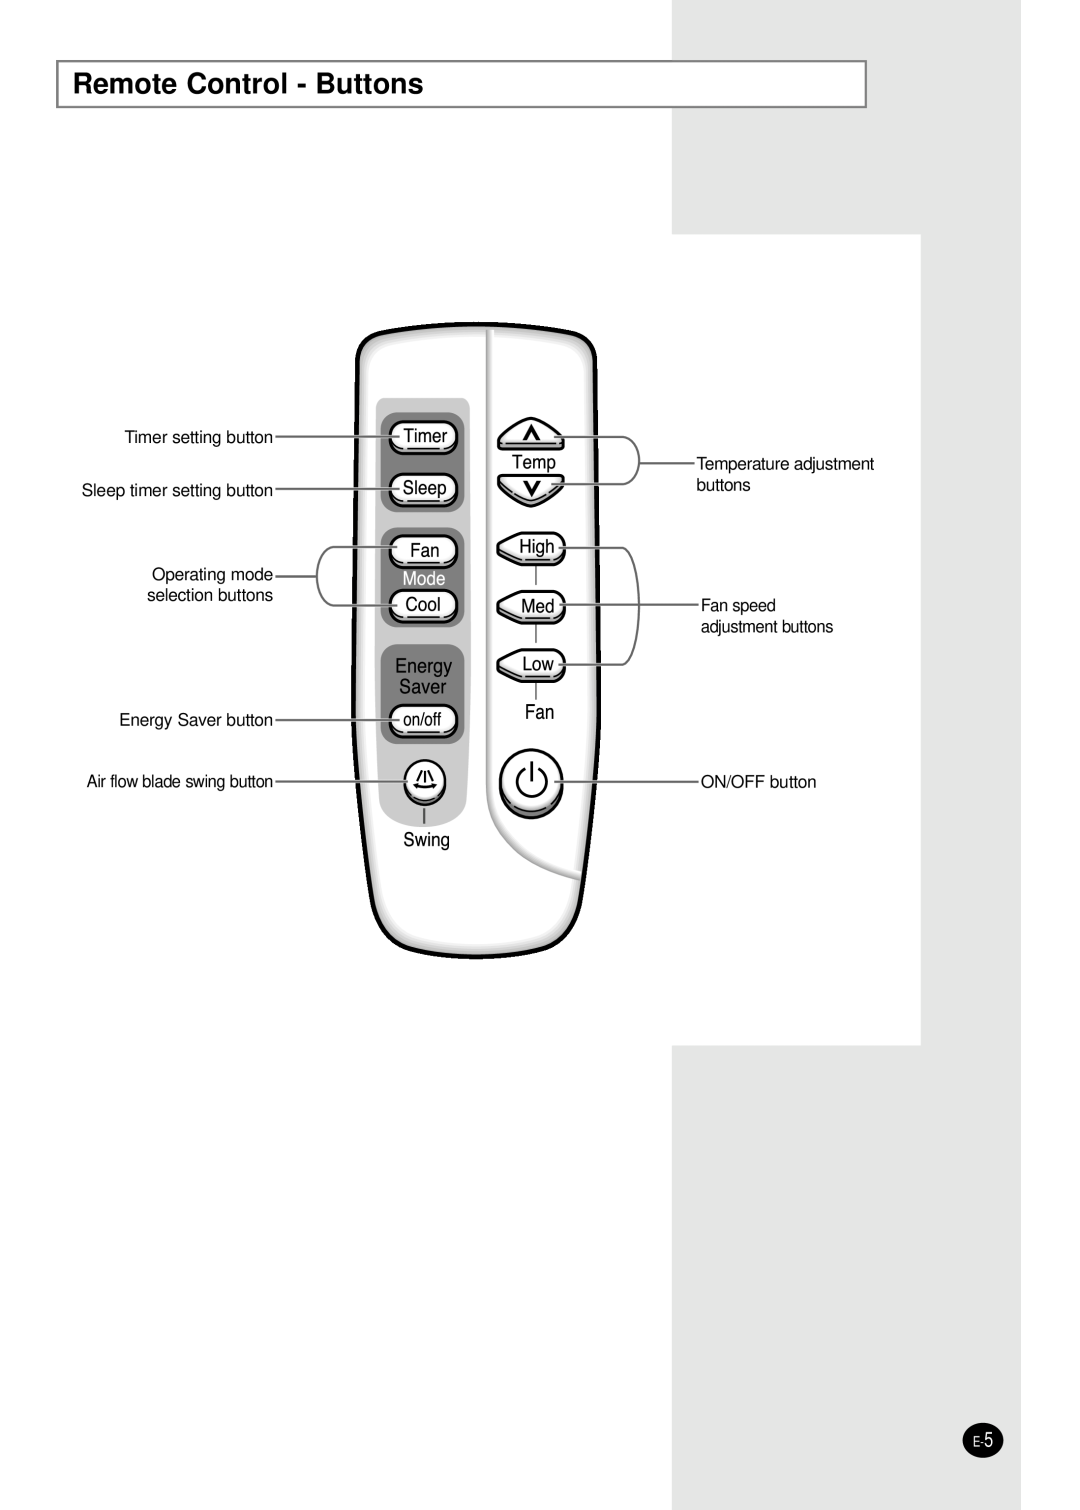 Samsung AW129AB Remote Control - Buttons, Timer setting button Sleep timer setting button, Temperature adjustment buttons 